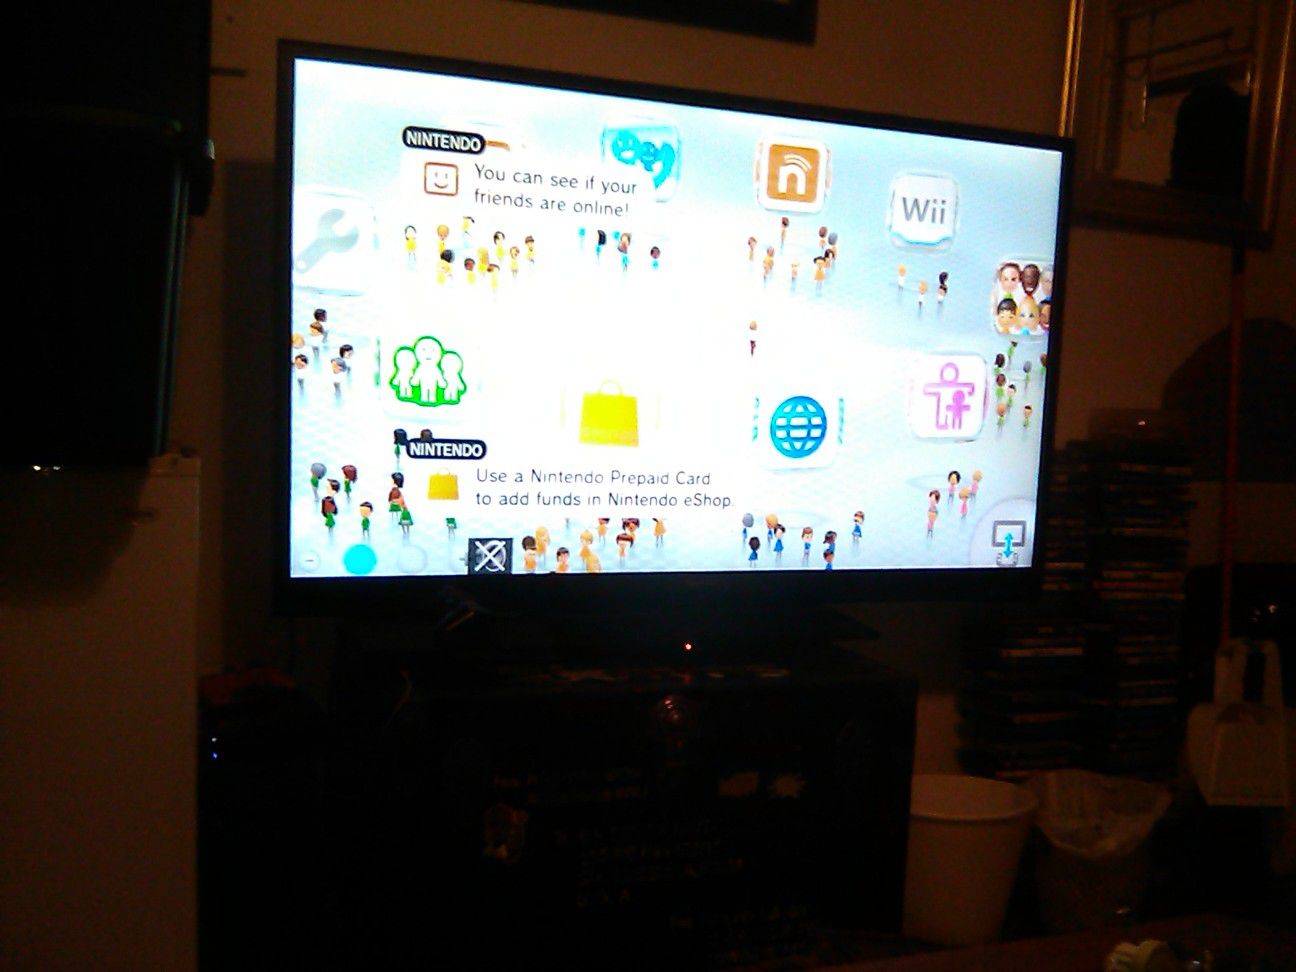 Nintendo Wii U console with screen pad and controller